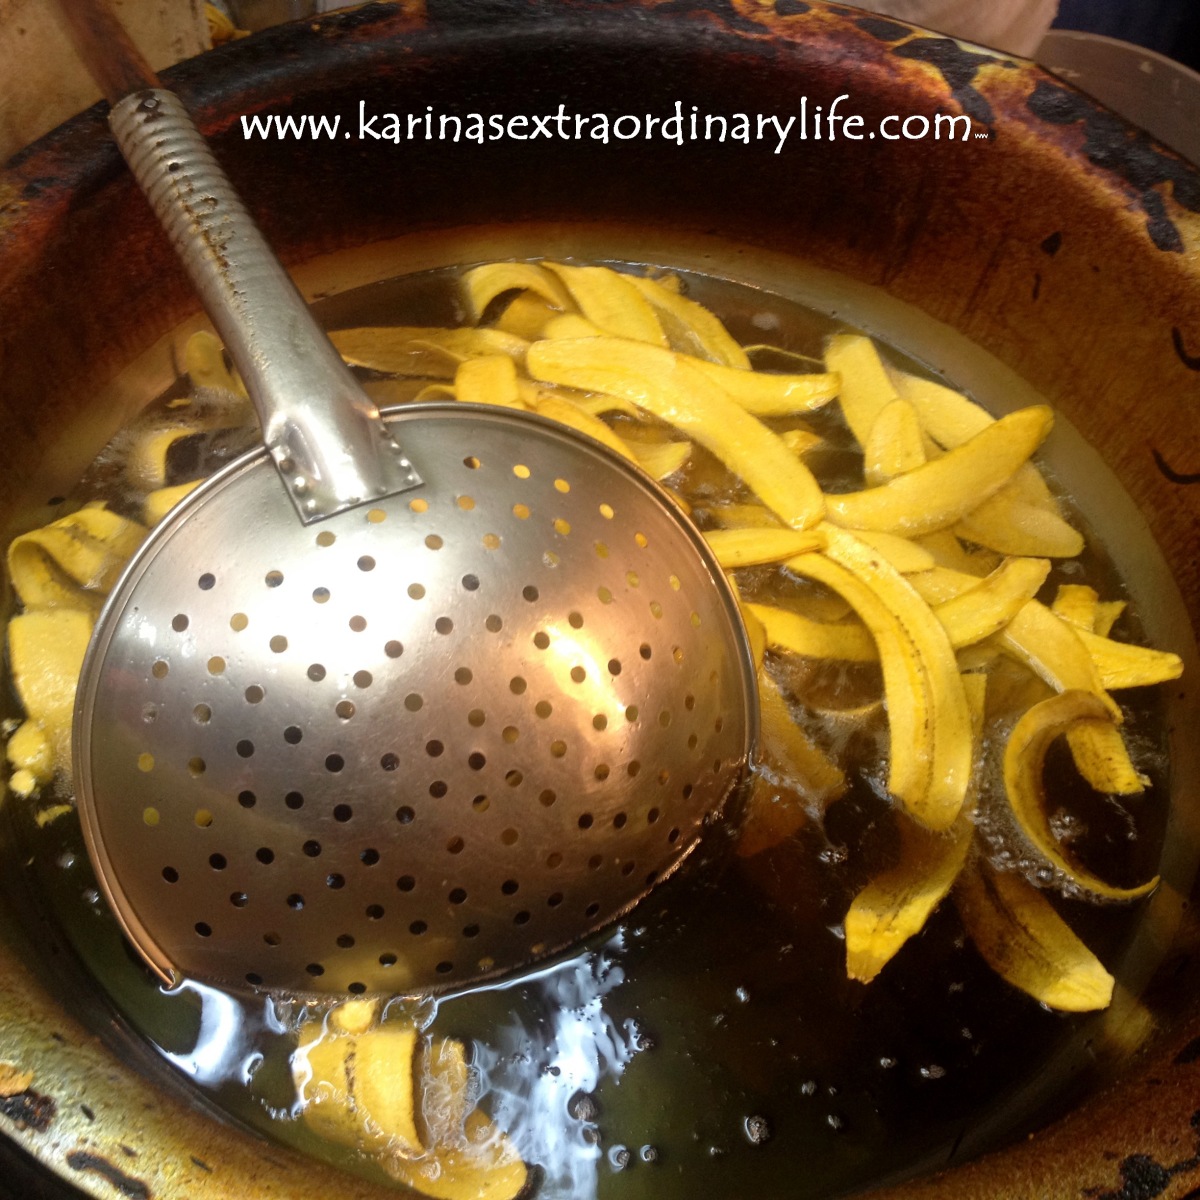 Fresh plantains frying in oil. This treat is surprisingly tasty, often garnished with salt and other delicious spices. Antigua, Guatemala -- April Beresford